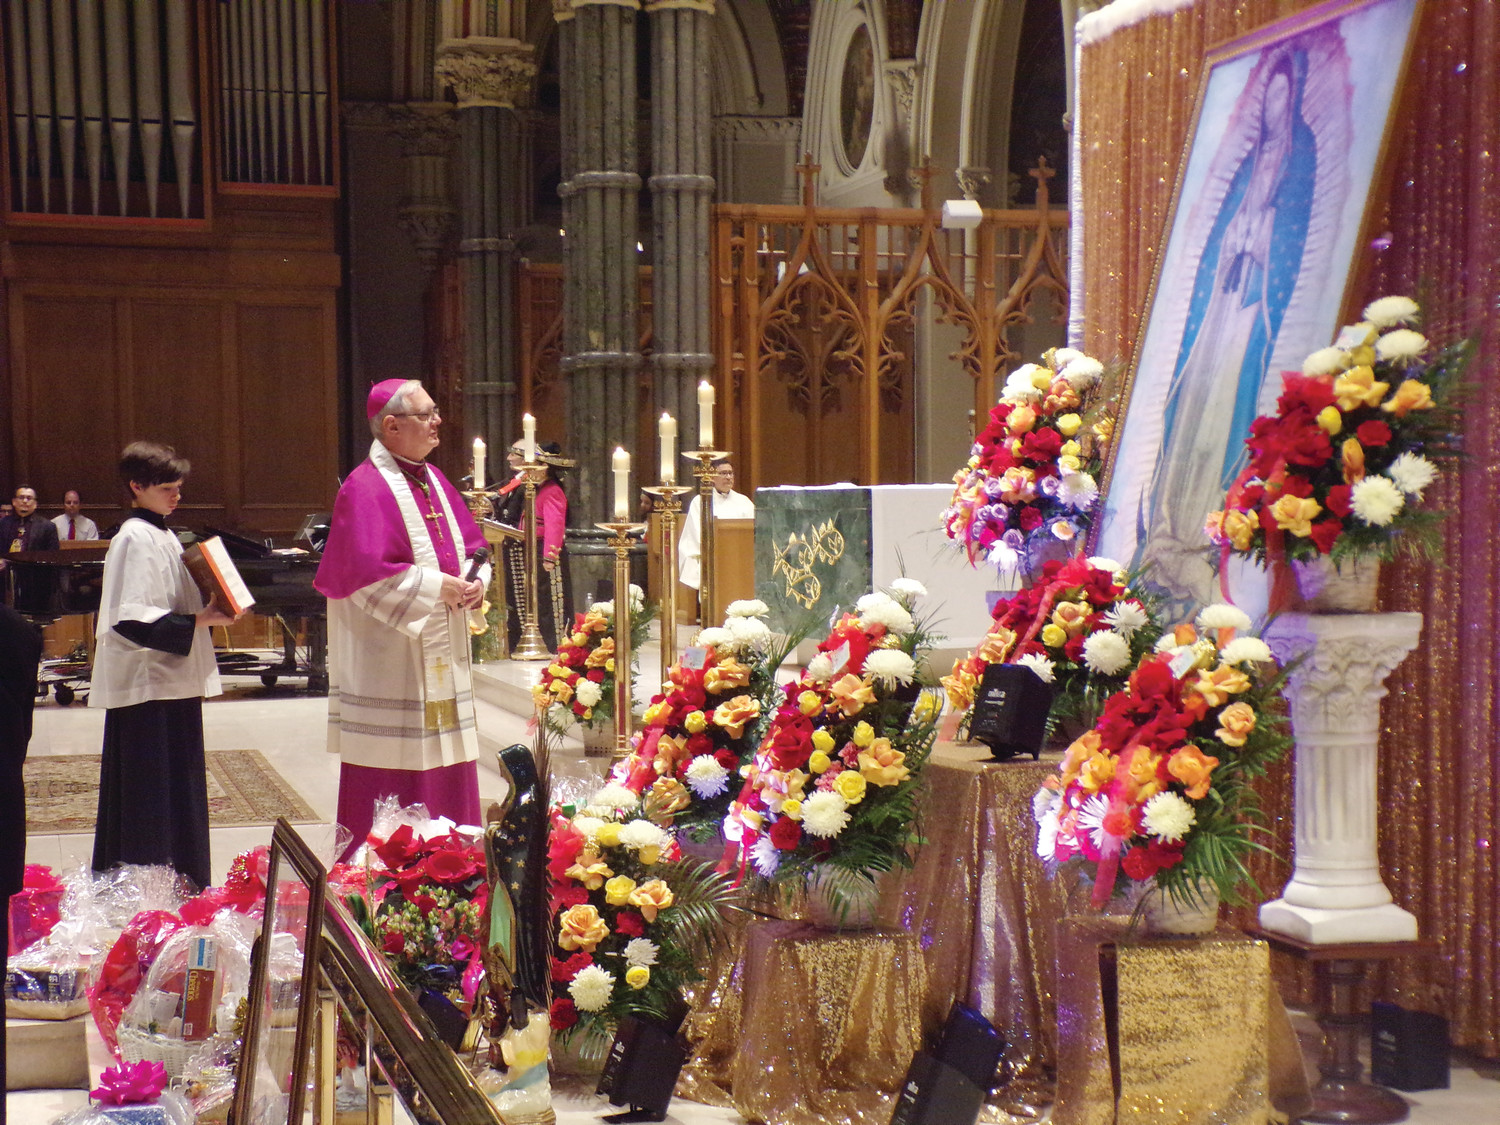 Bishop Thomas J. Tobin prepares to bless the image of Our Lady of Guadalupe during the December 12 Mass at the Cathedral of Saints Peter and Paul, Providence.